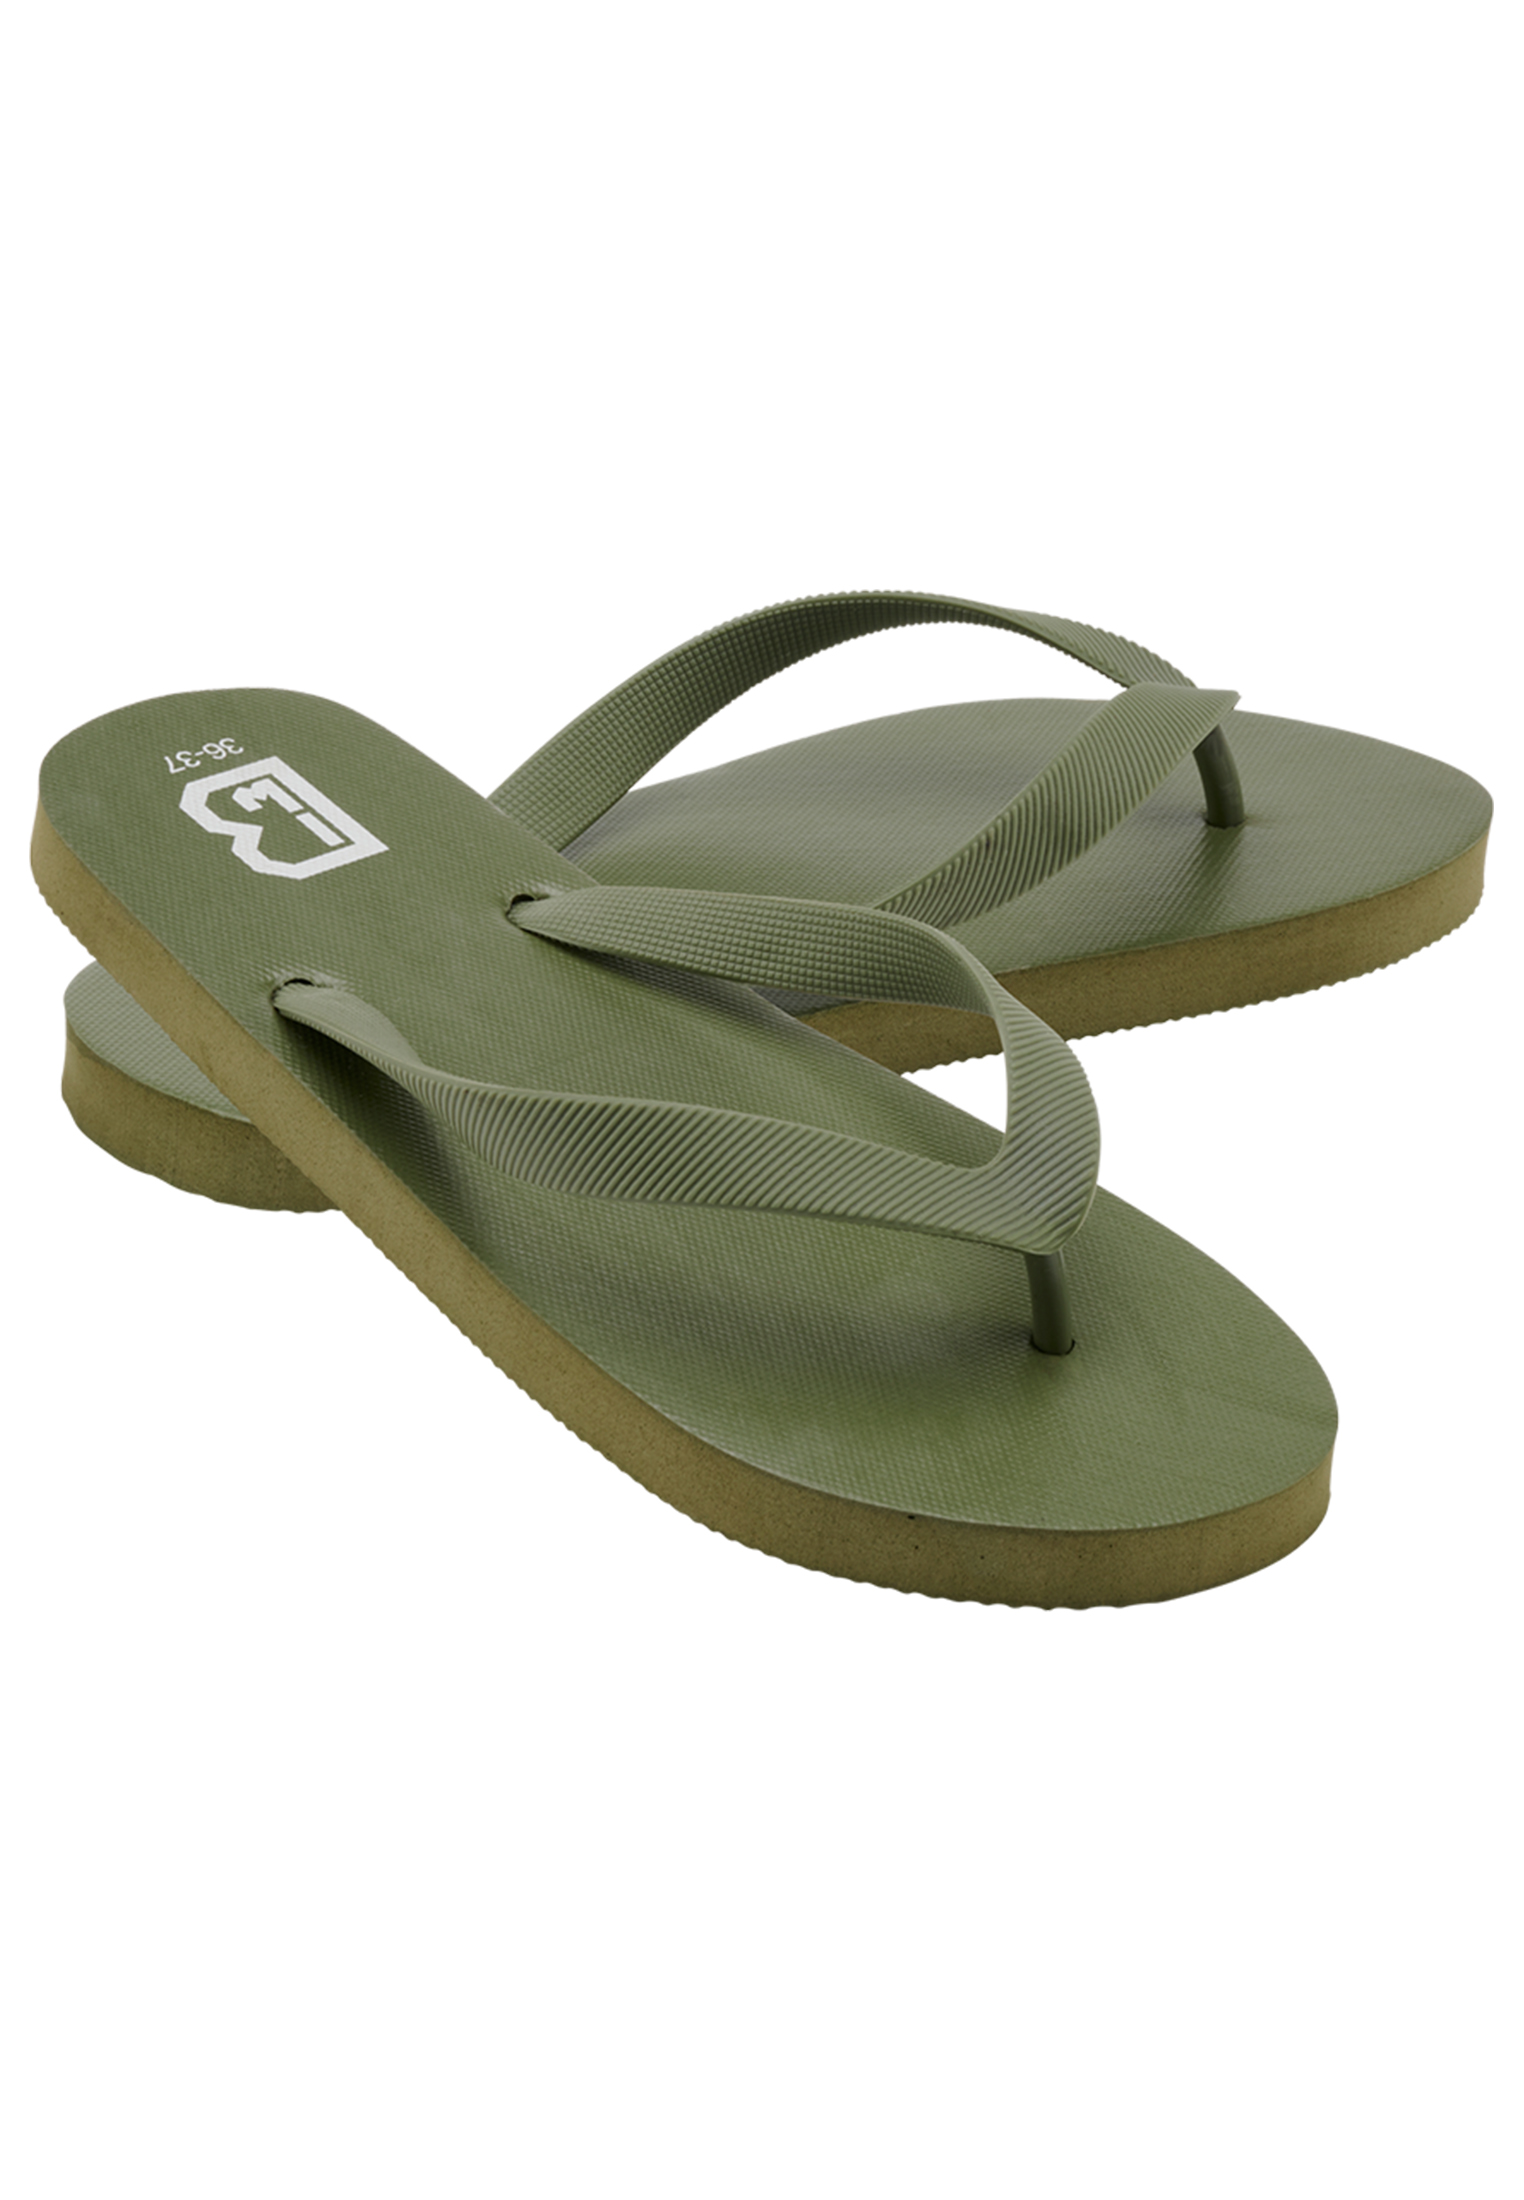 Accessoires Beach Slipper in Farbe olive